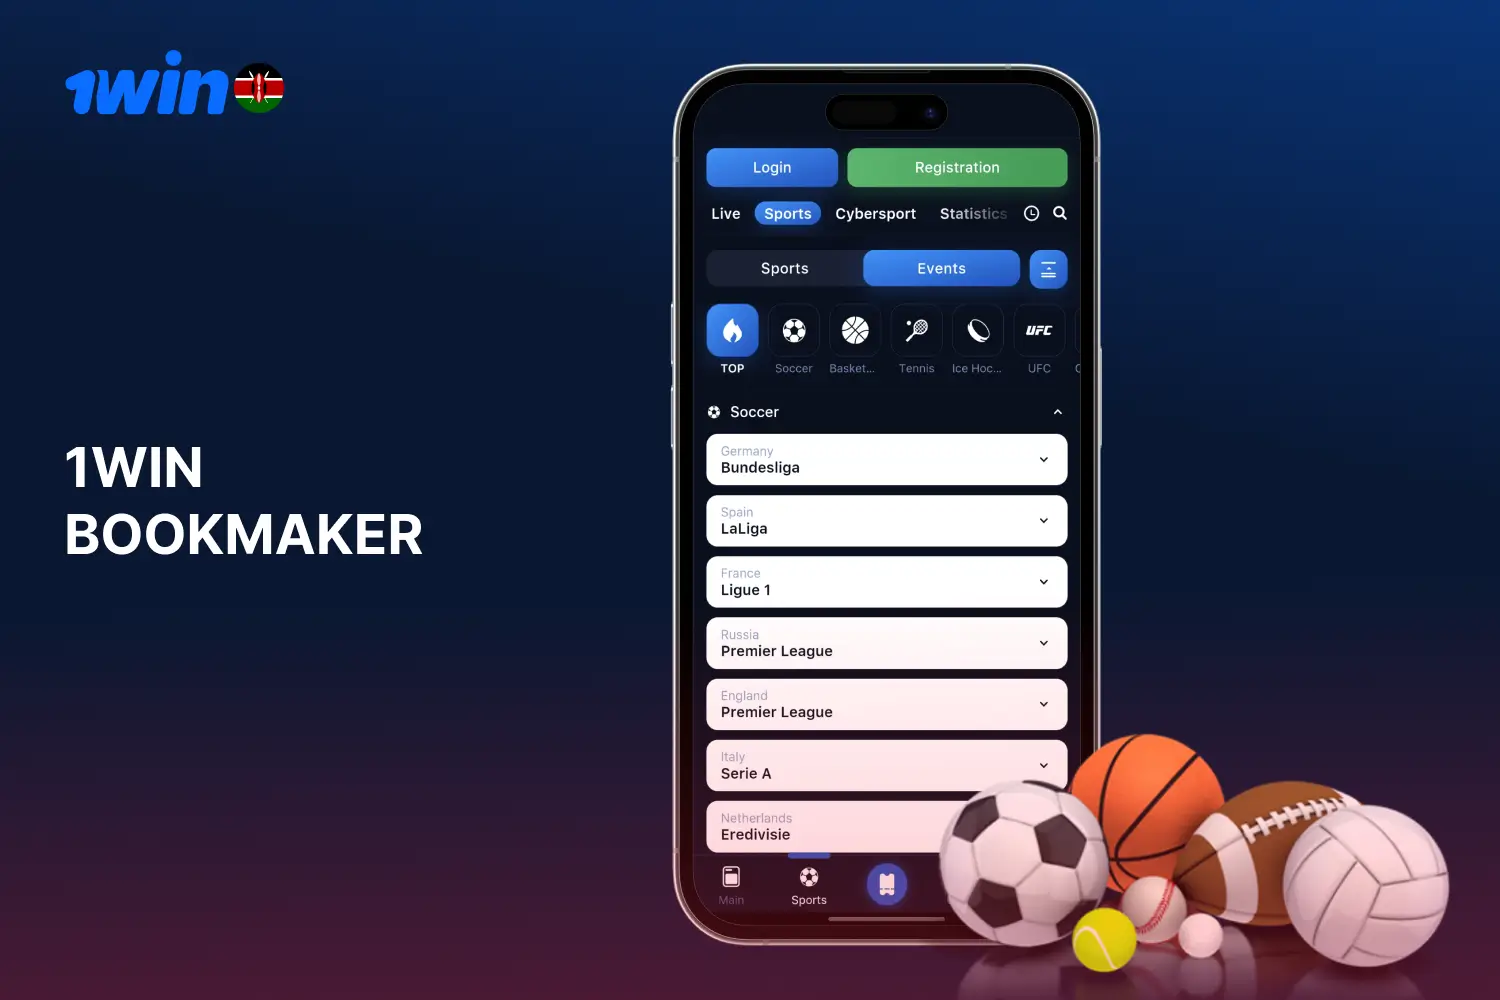 1win users in Kenya have access to a wide range of sports betting in over 35 disciplines and various modes including pre-match mode